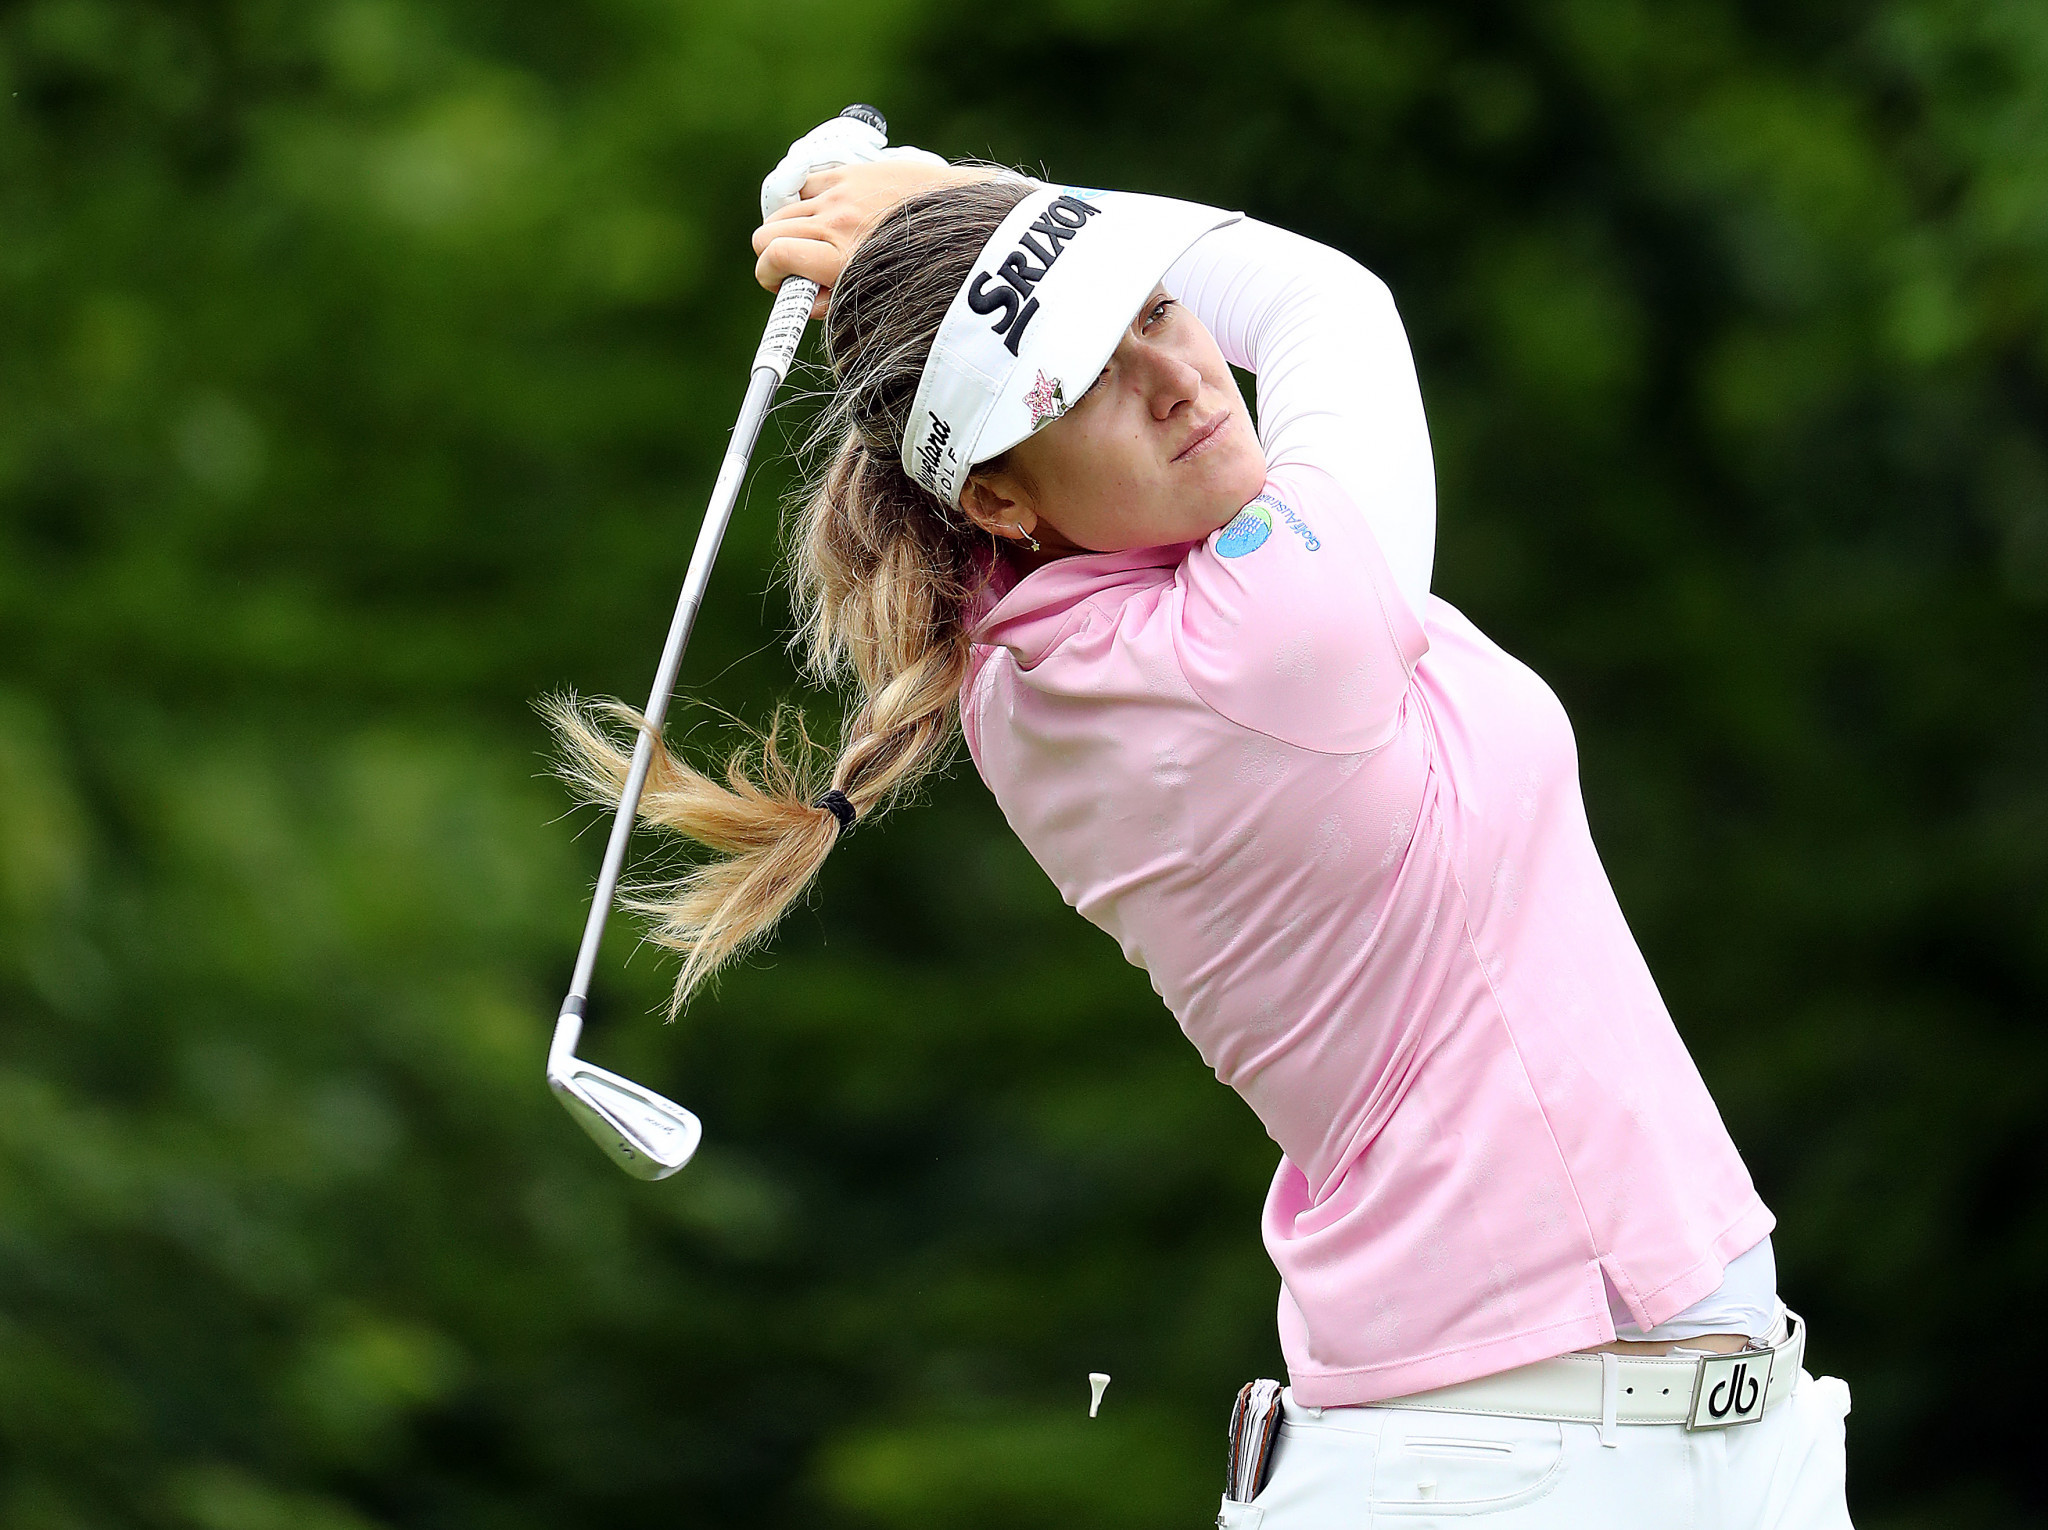 Green's lead cut to a single shot heading into final round of Women's PGA Championship